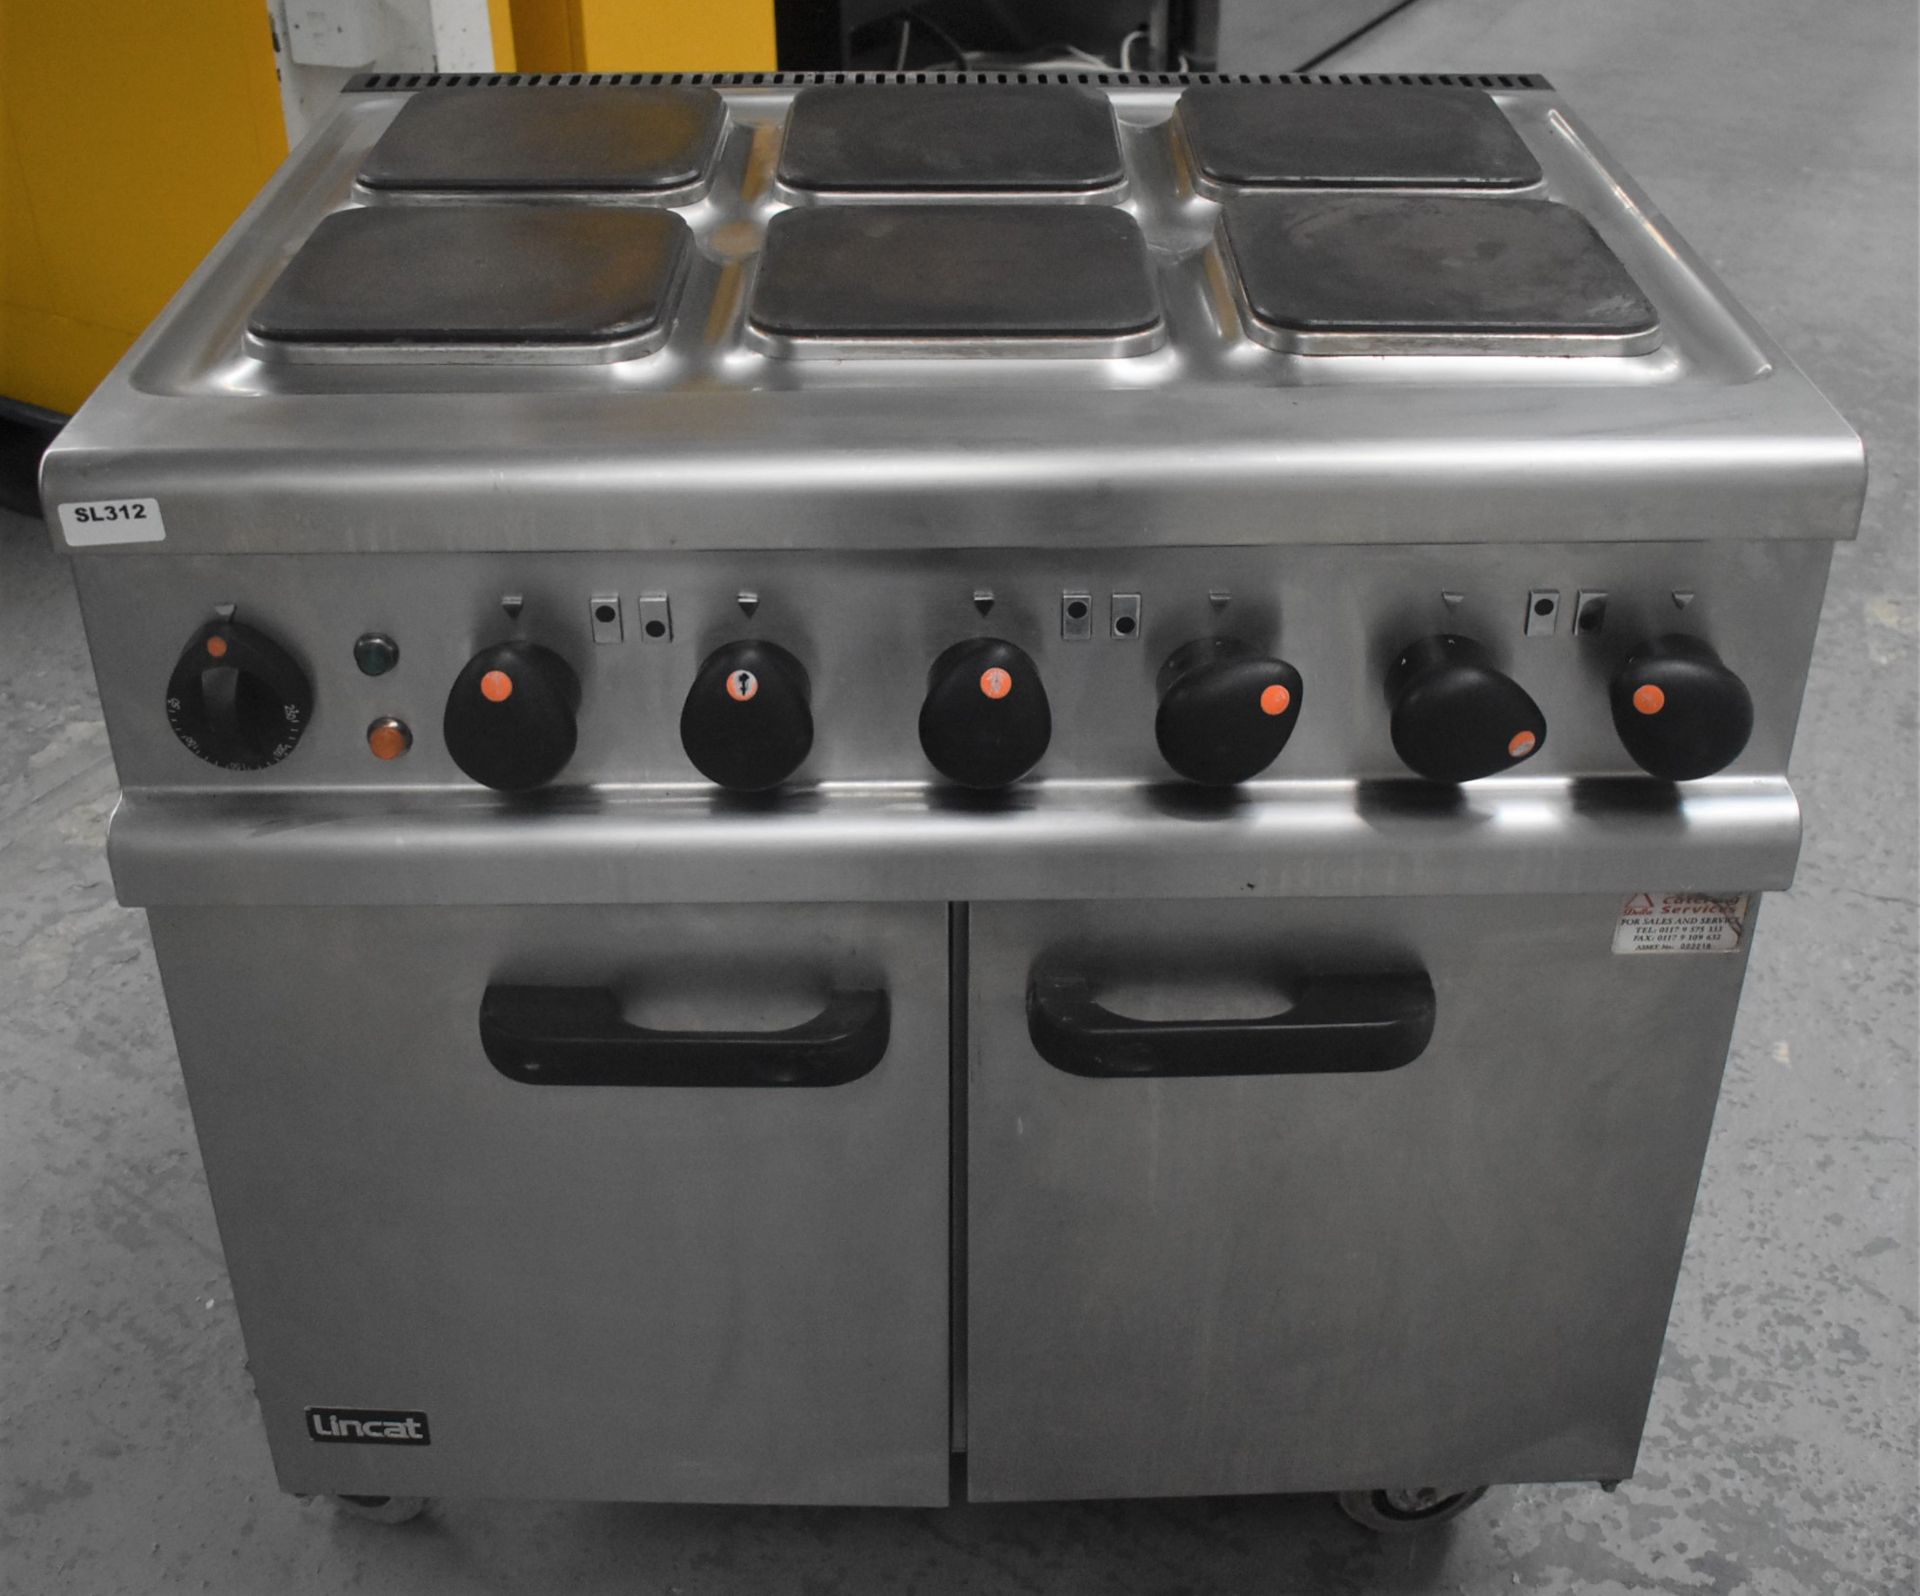 1 x Lincat Electric 6 Burner Range Cooker With Stainless Steel Exterior - Recently Removed from a - Image 8 of 9